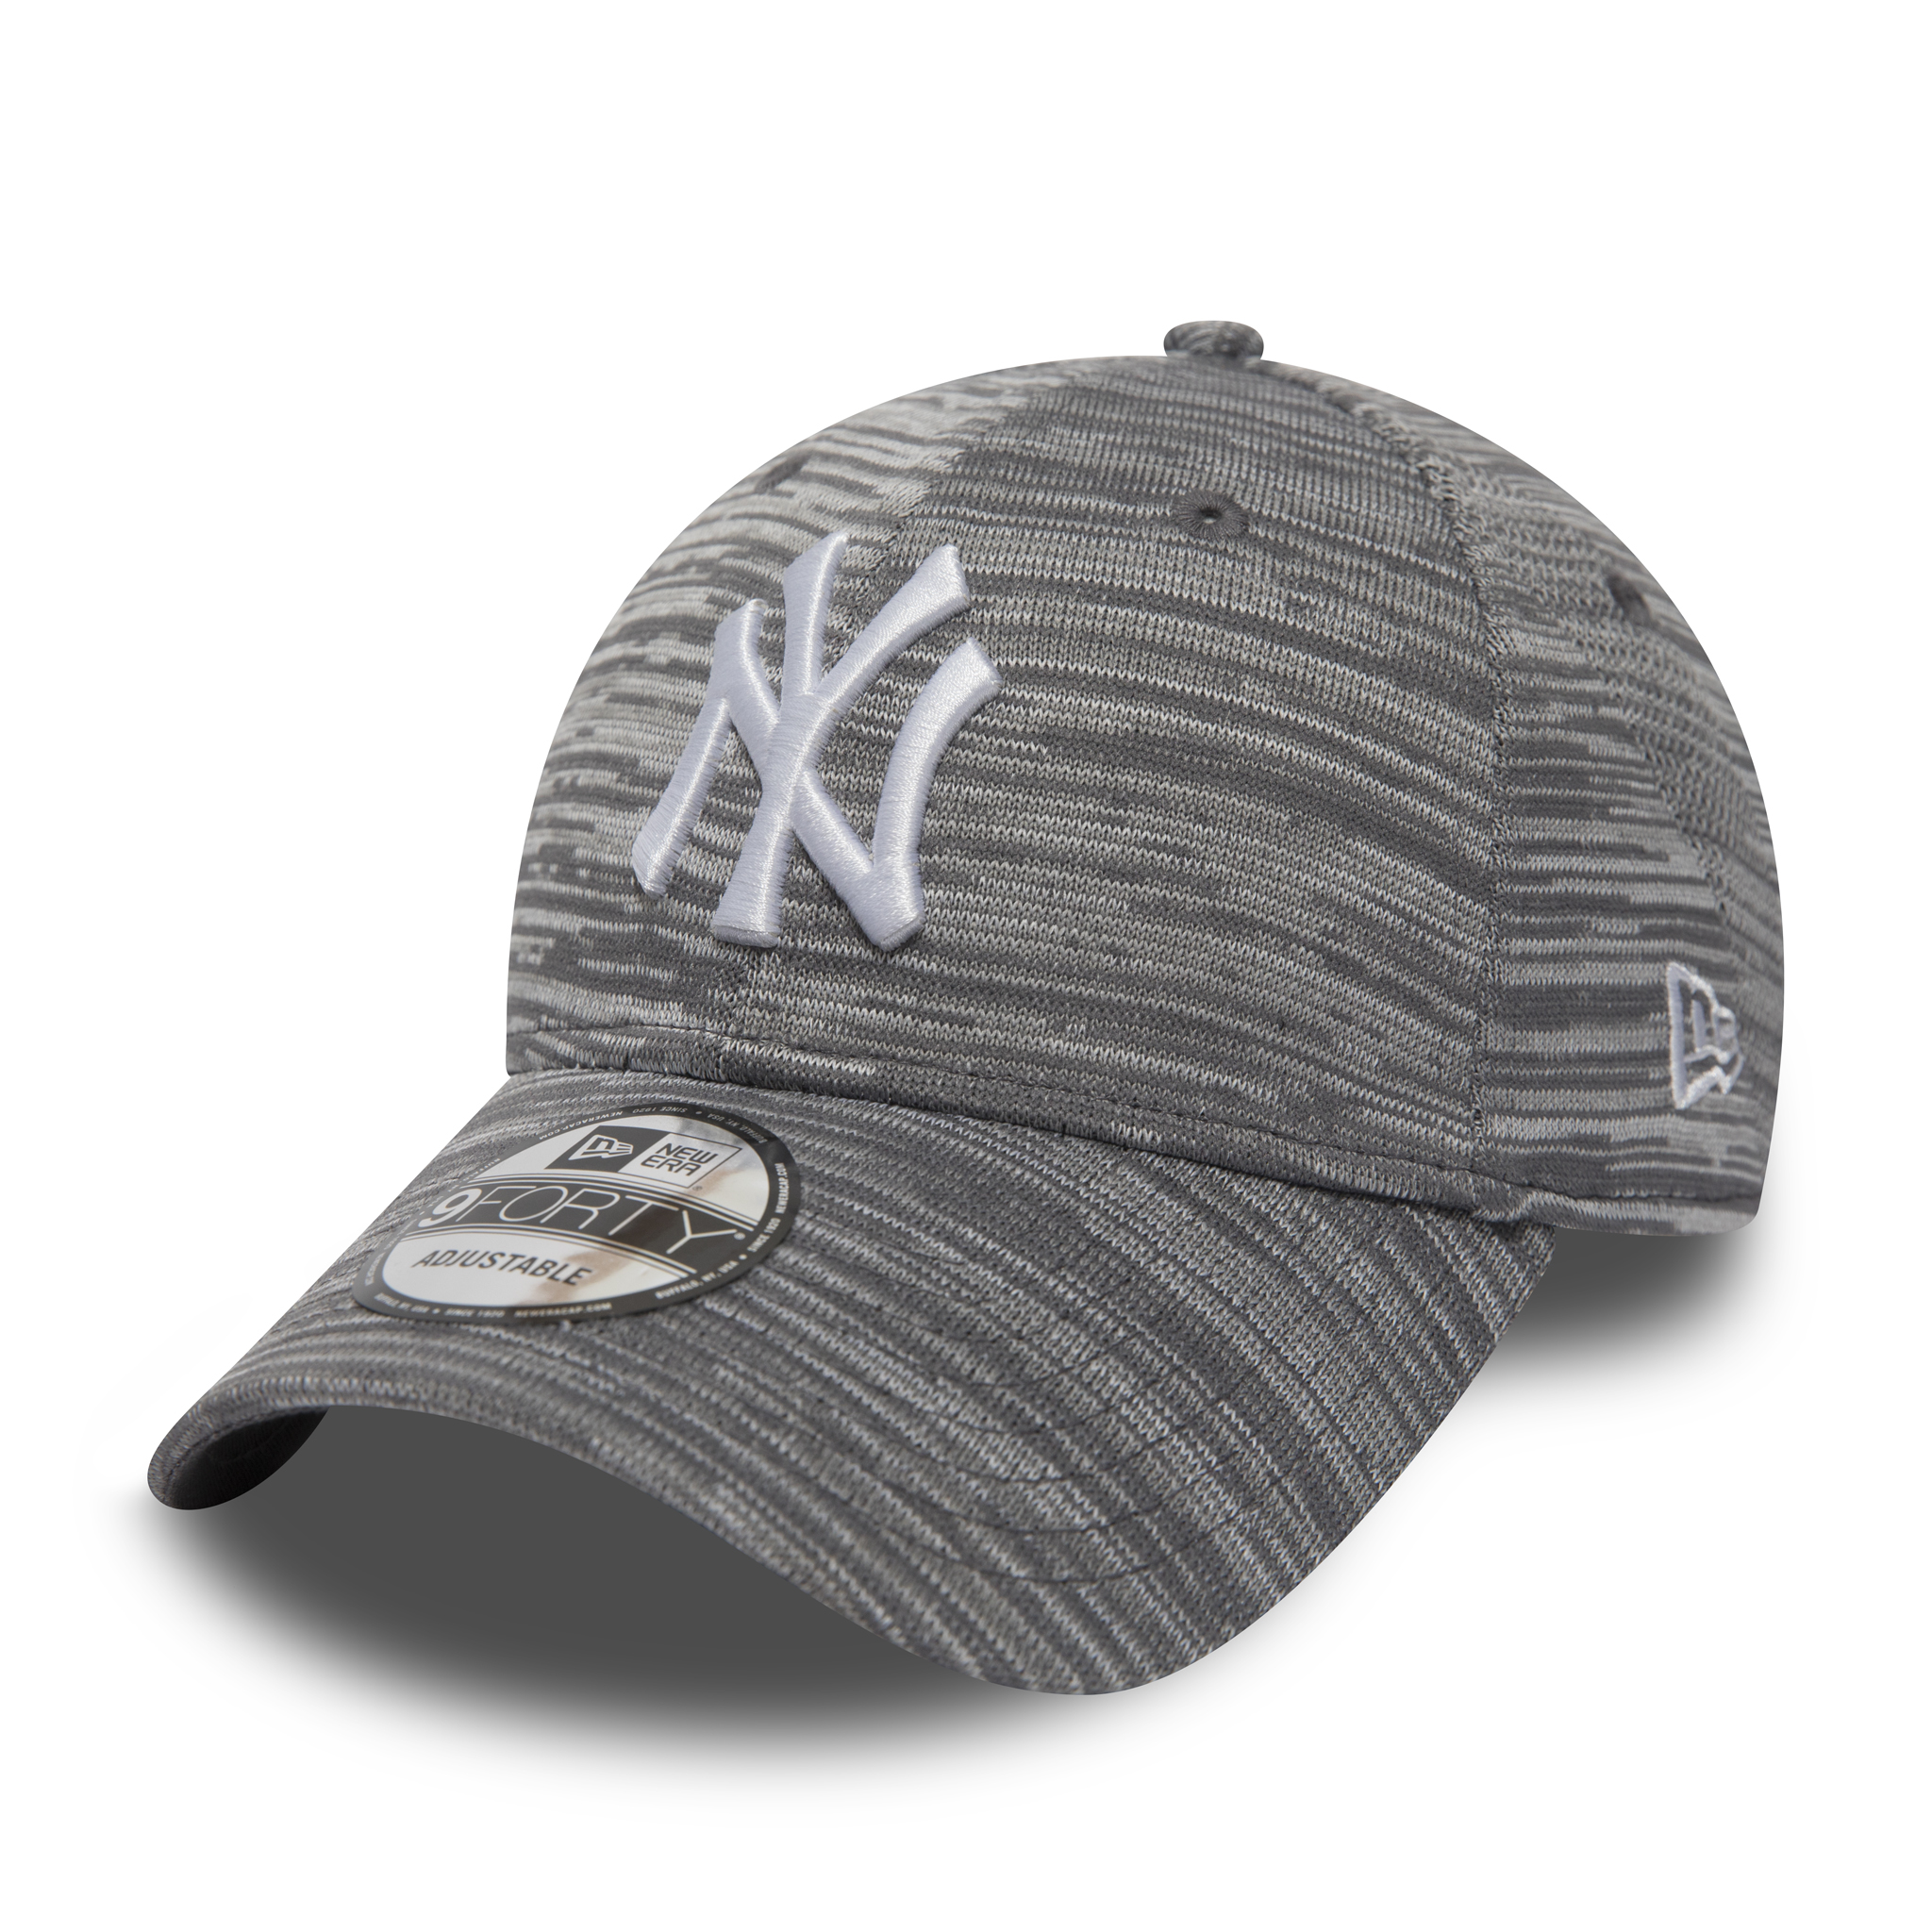 New York Yankees Engineered Fit Grey 9FORTY Cap